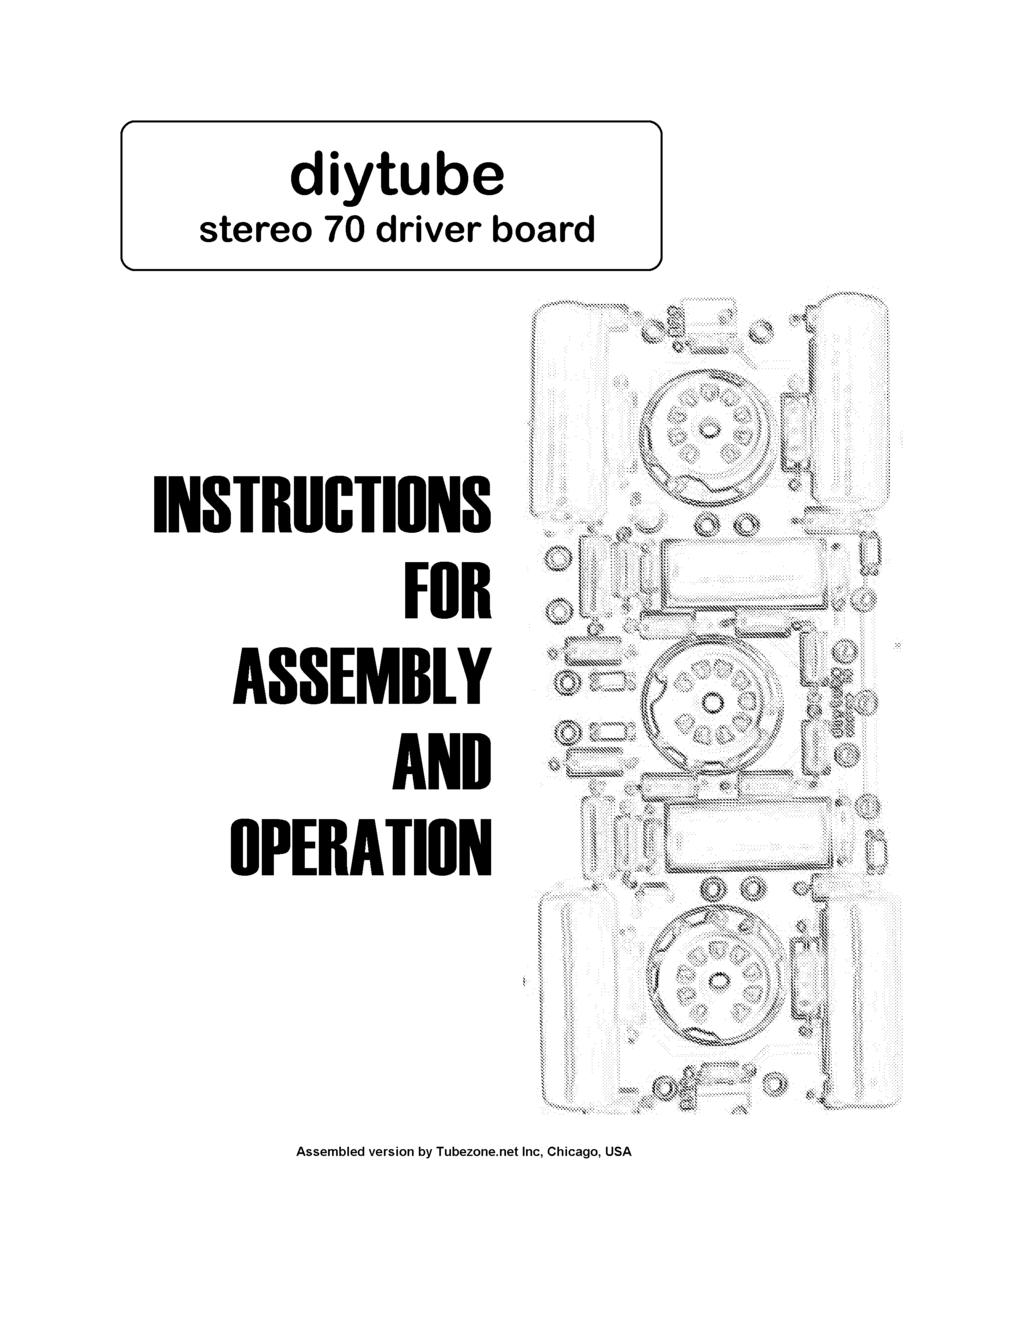 DIY Tube Stereo 70 Board - TubeZone Assembled -Instructions - Page 1 Board and portions of manual, (c) 2006 Shannon Parks & DIYtube.com.